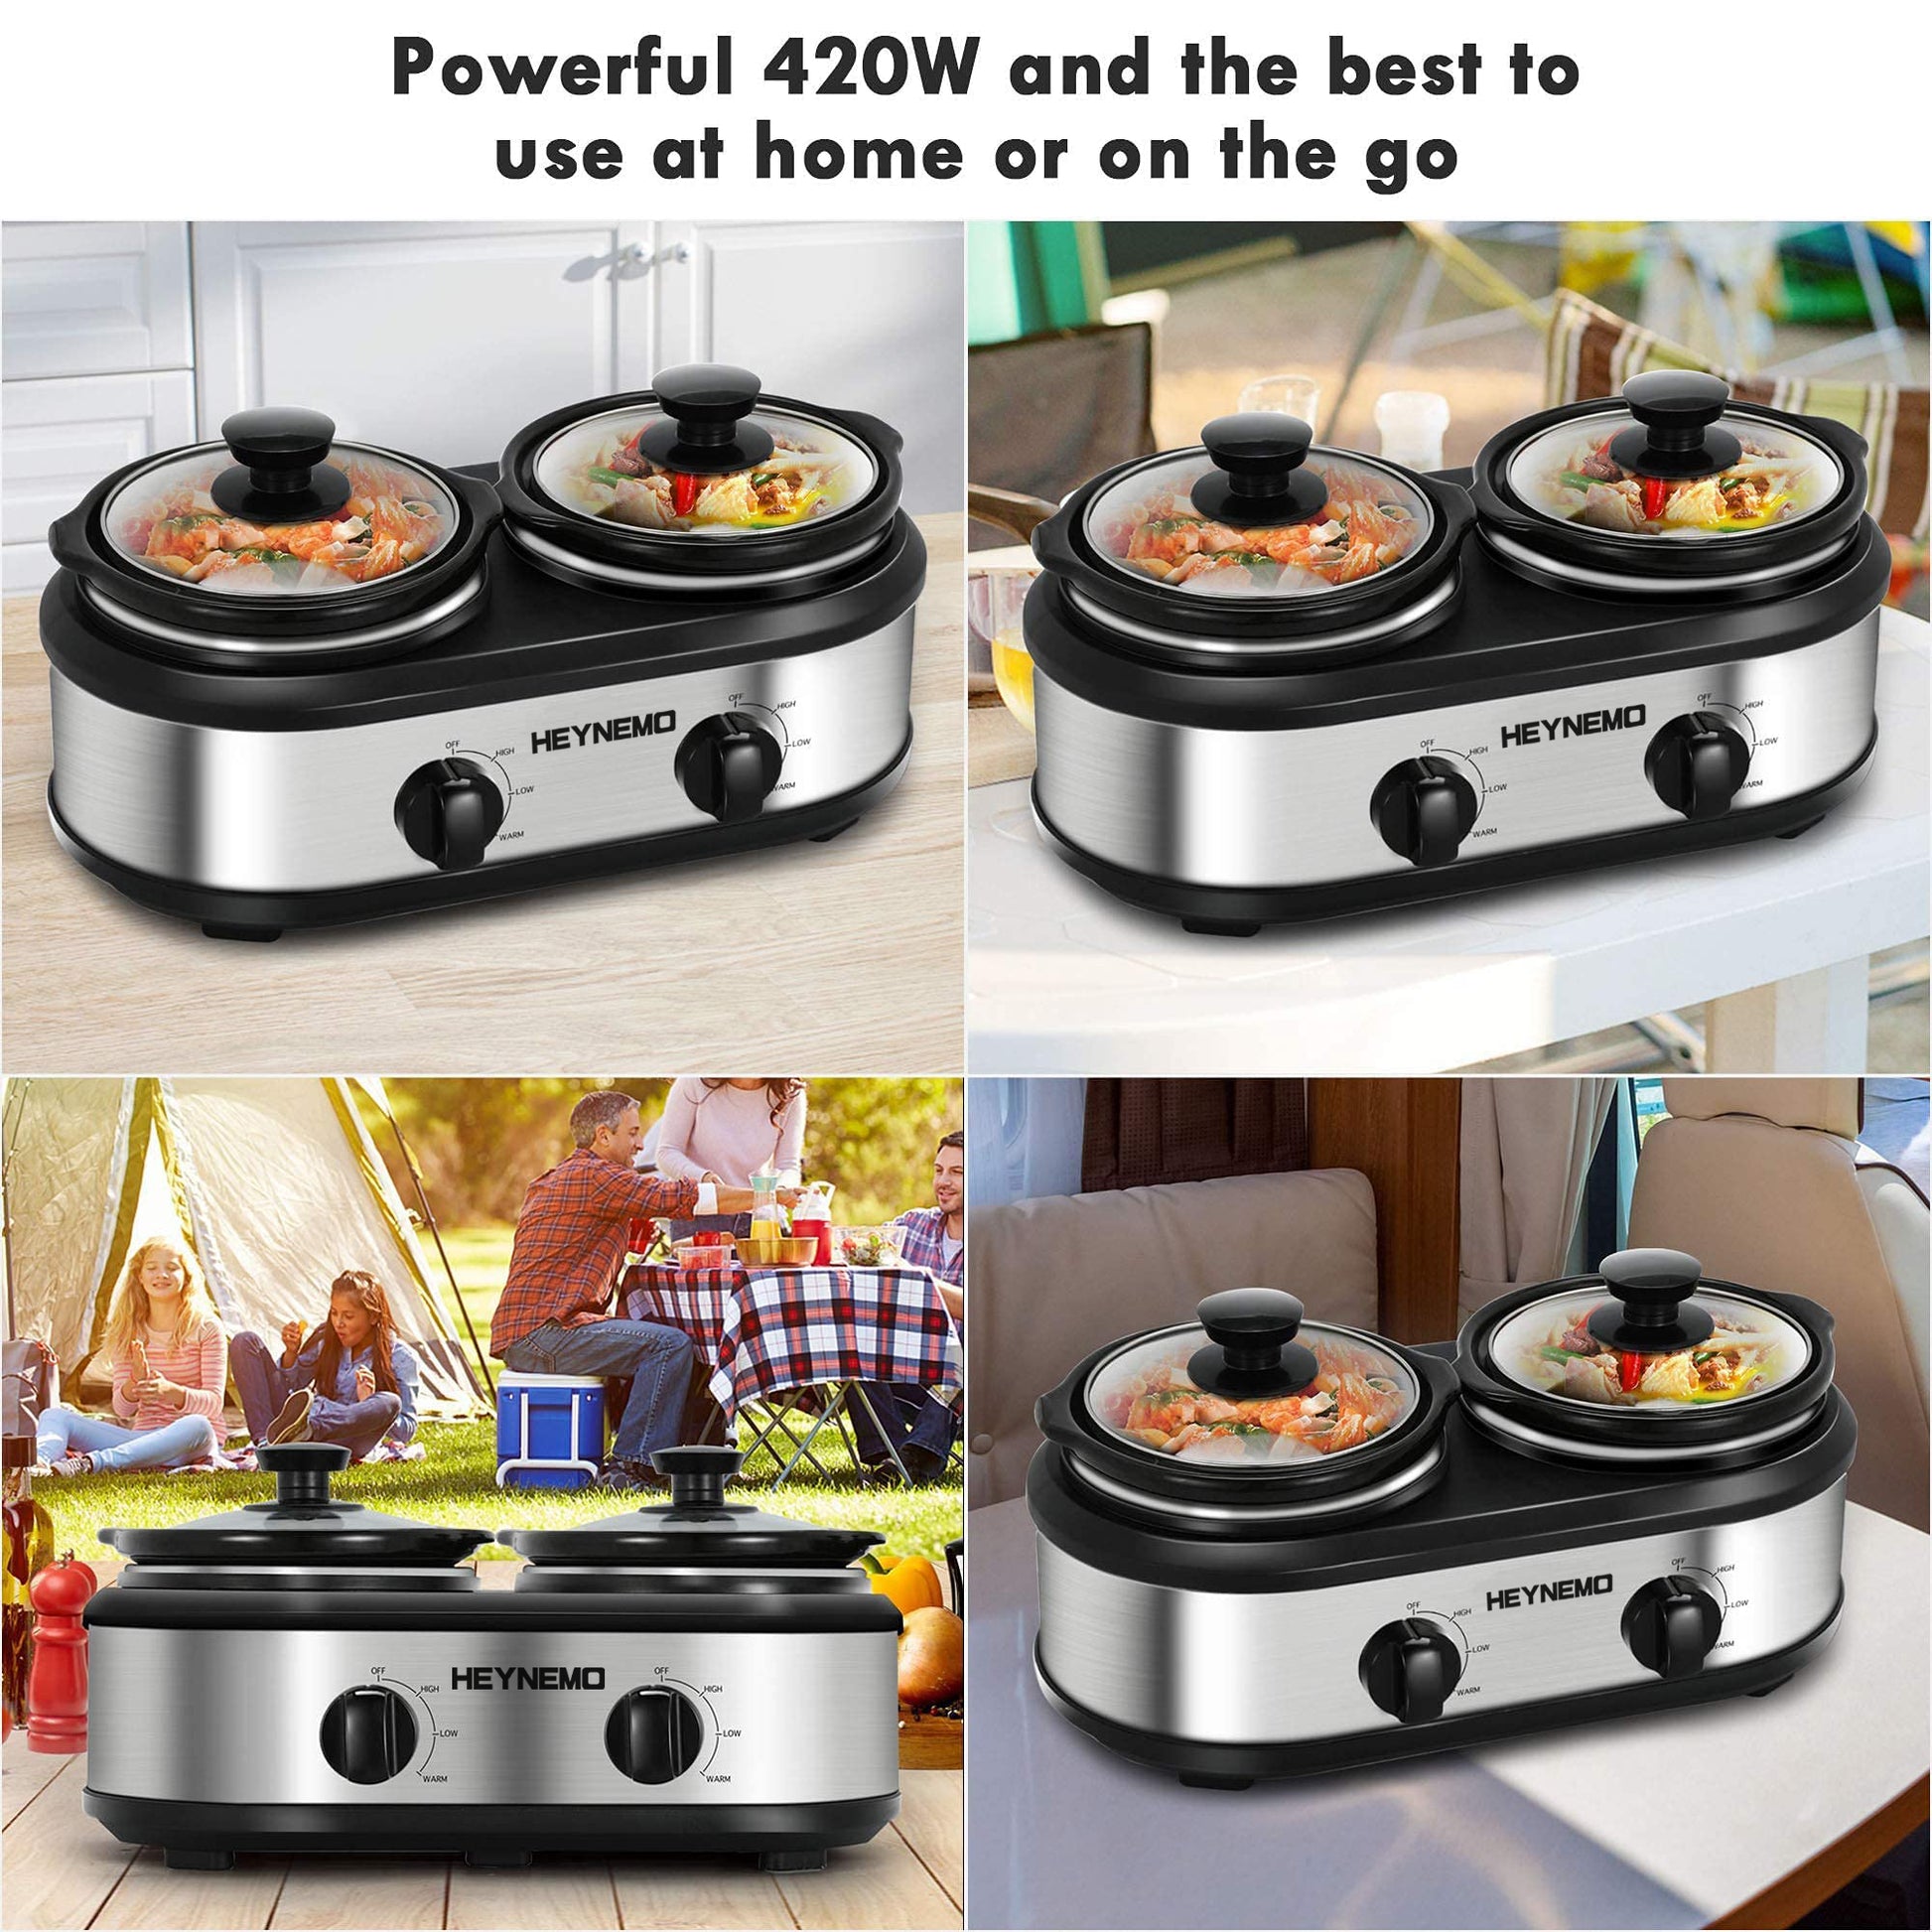 ELECTRONIC STEAMING CROCK POT WITH PLAYFOOD - Toys Club